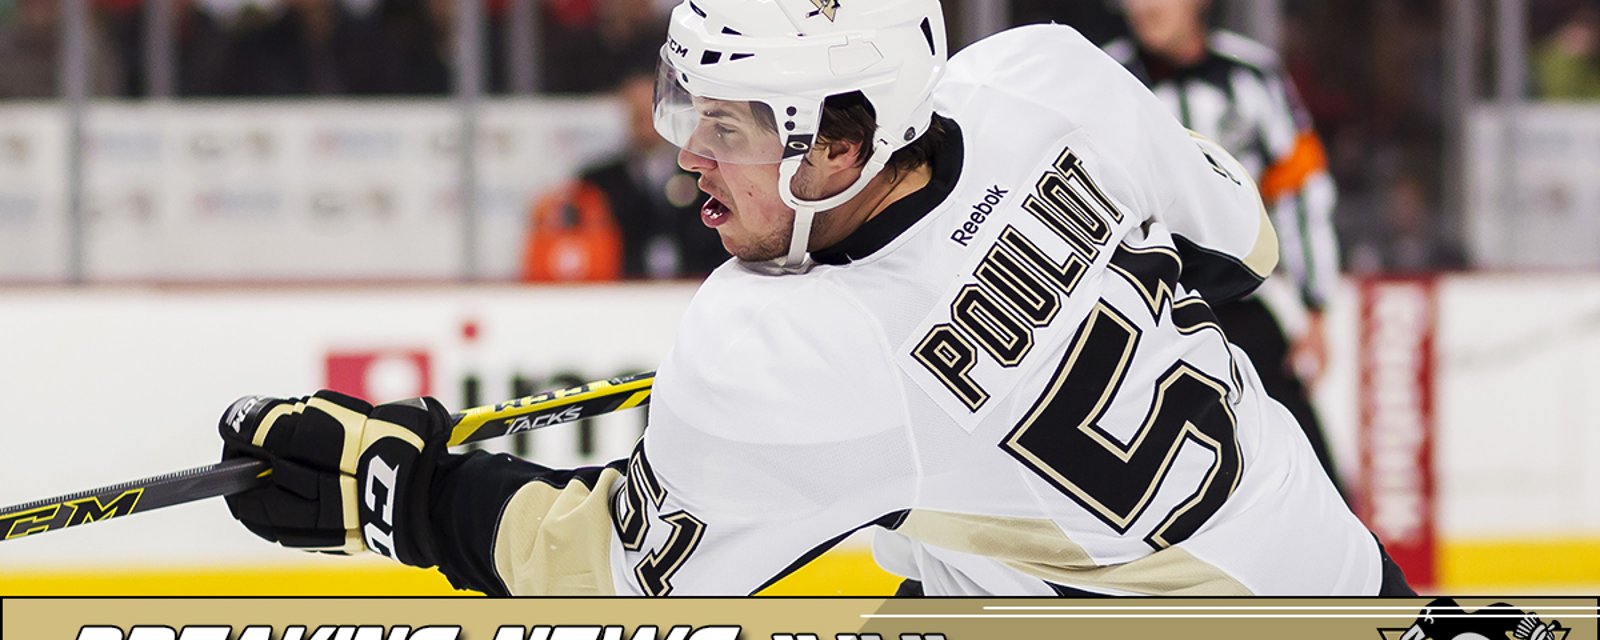 Breaking: Bad news for Derrick Pouliot.